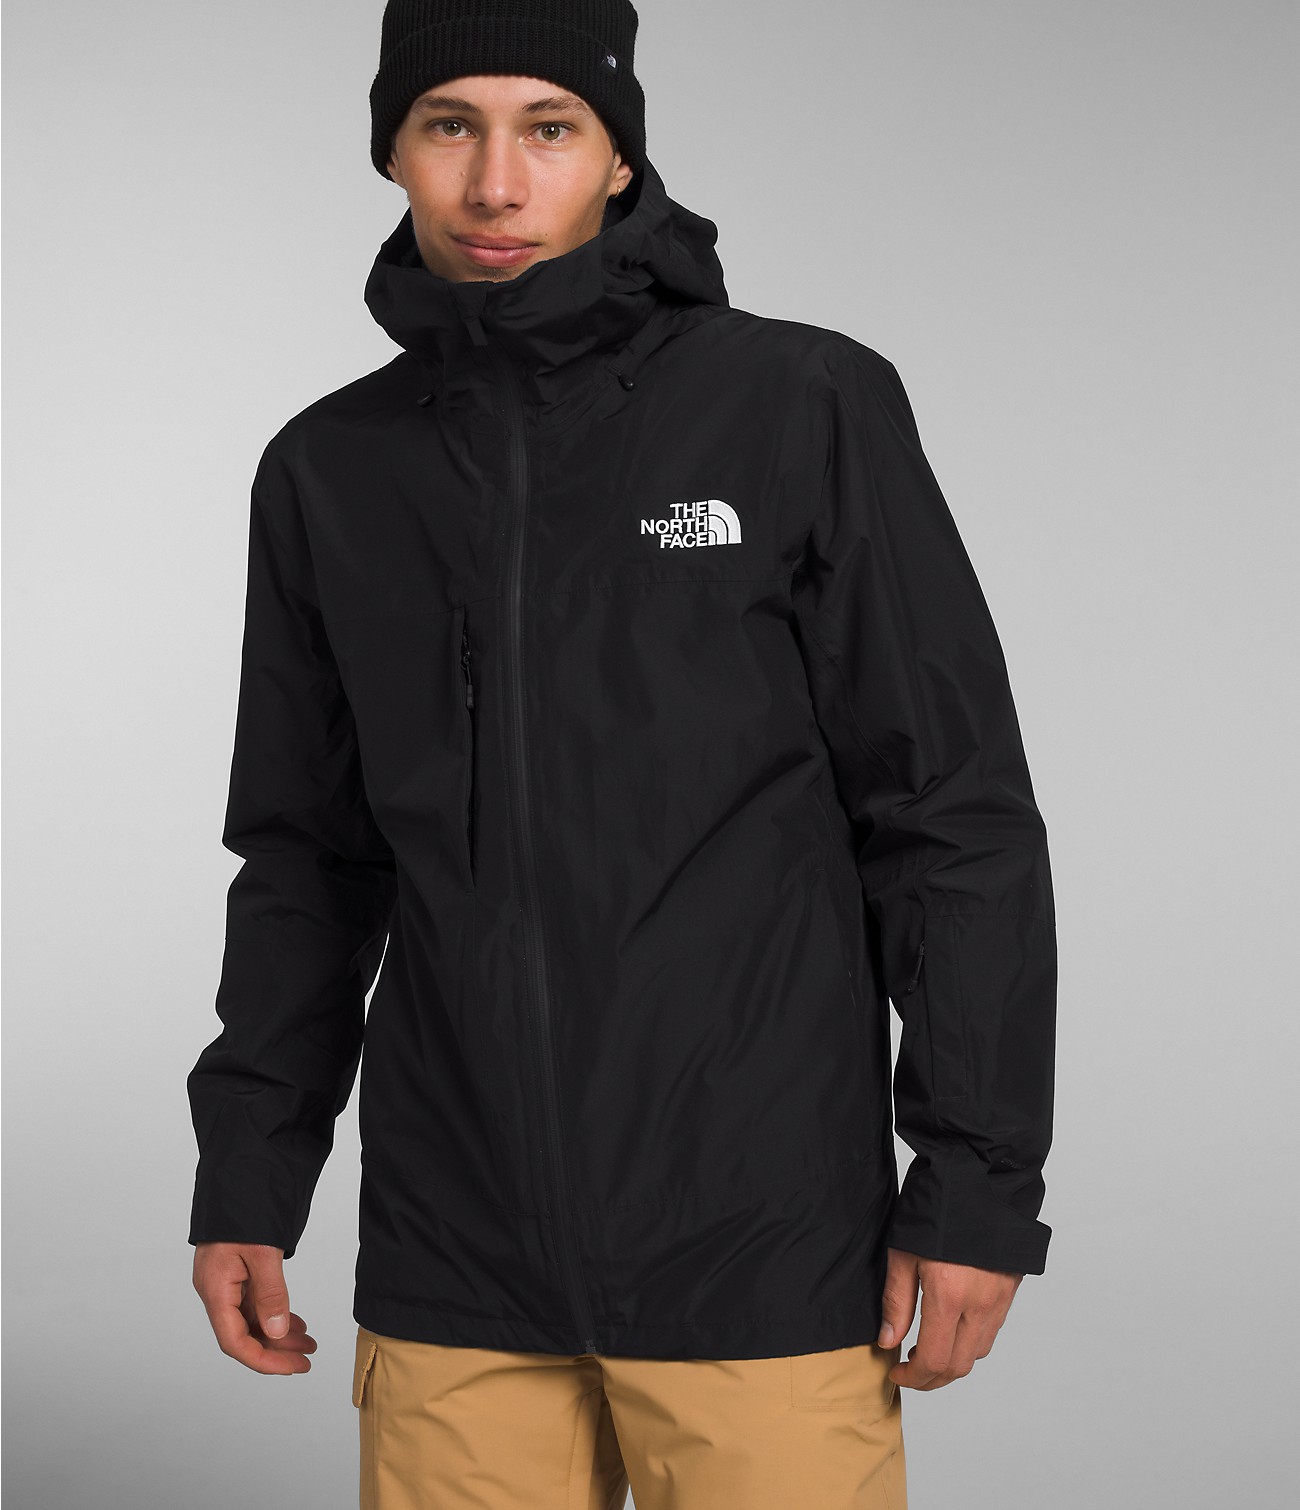 Unlock Wilderness' choice in the Spyder Vs North Face comparison, the ThermoBall™ Eco Snow Triclimate® Jacket by The North Face